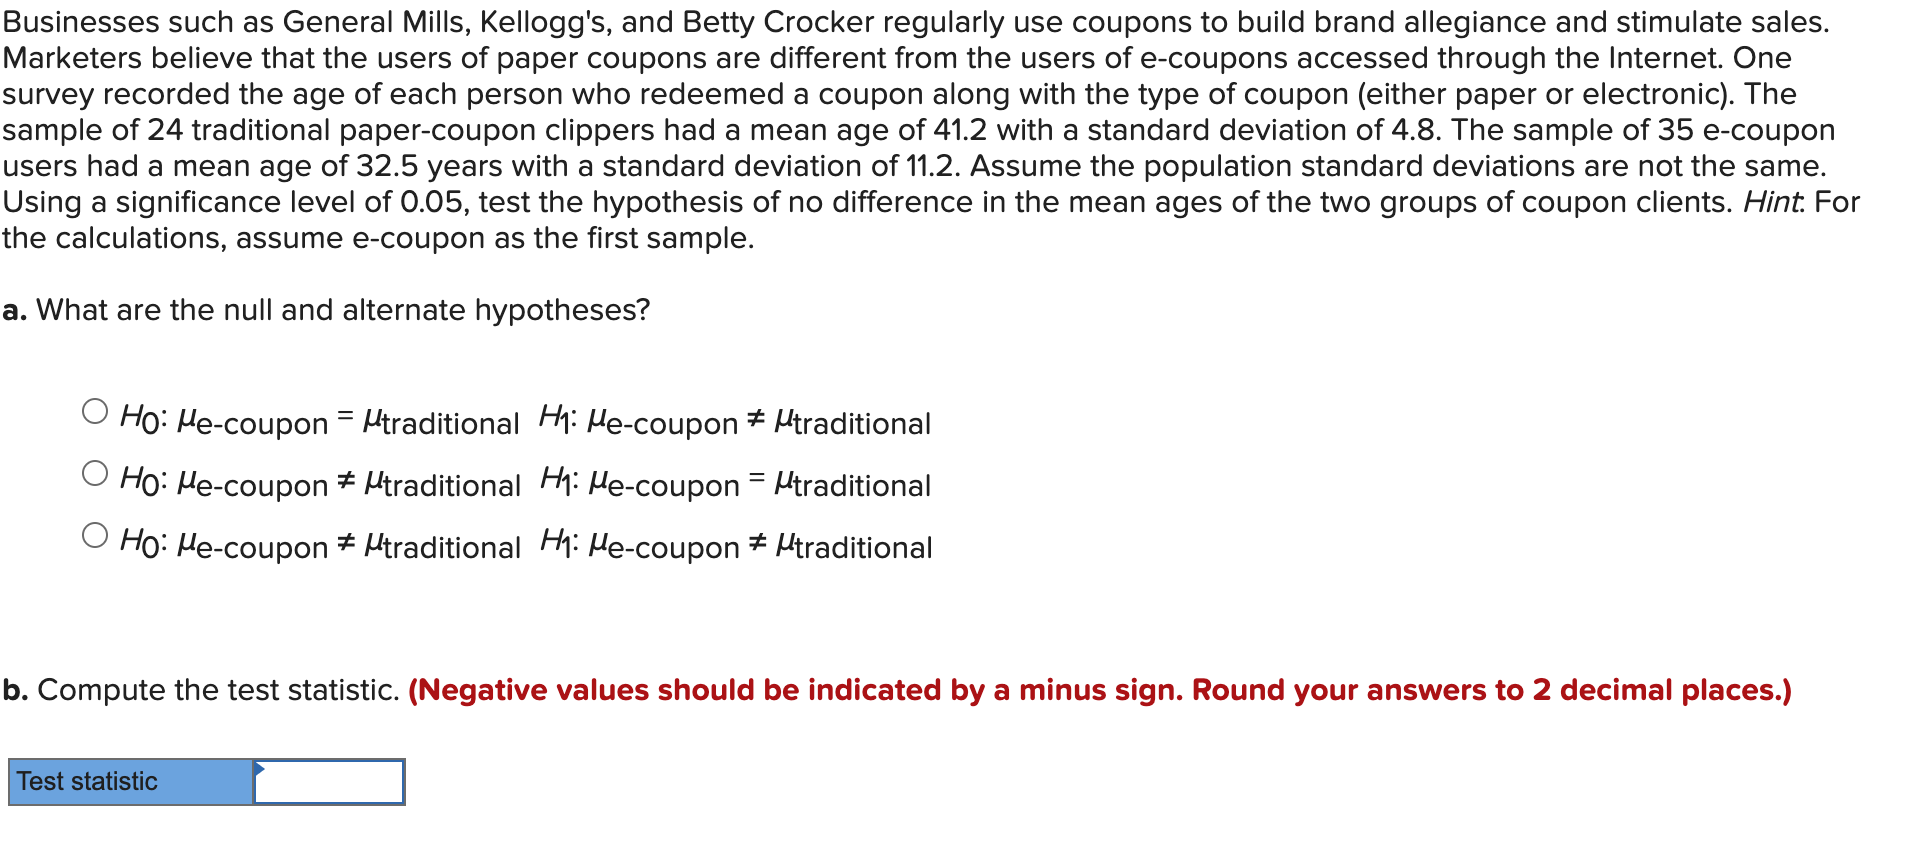 Businesses such as General Mills, Kellogg's, and Betty Crocker regularly use coupons to build brand allegiance and stimulate sales.
Marketers believe that the users of paper coupons are different from the users of e-coupons accessed through the Internet. One
survey recorded the age of each person who redeemed a coupon along with the type of coupon (either paper or electronic). The
sample of 24 traditional paper-coupon clippers had a mean age of 41.2 with a standard deviation of 4.8. The sample of 35 e-coupon
users had a mean age of 32.5 years with a standard deviation of 11.2. Assume the population standard deviations are not the same.
Using a significance level of 0.05, test the hypothesis of no difference in the mean ages of the two groups of coupon clients. Hint: For
the calculations, assume e-coupon as the first sample.
a. What are the null and alternate hypotheses?
O Ho: He-coupon = Htraditional Hi Me-coupon # Mtraditional
%3D
O Ho: He-coupon + Htraditional Hhi He-coupon = Htraditional
O Ho: He-coupon * Htraditional Hh: He-coupon + Htraditional
b. Compute the test statistic. (Negative values should be indicated by a minus sign. Round your answers to 2 decimal places.)
Test statistic
